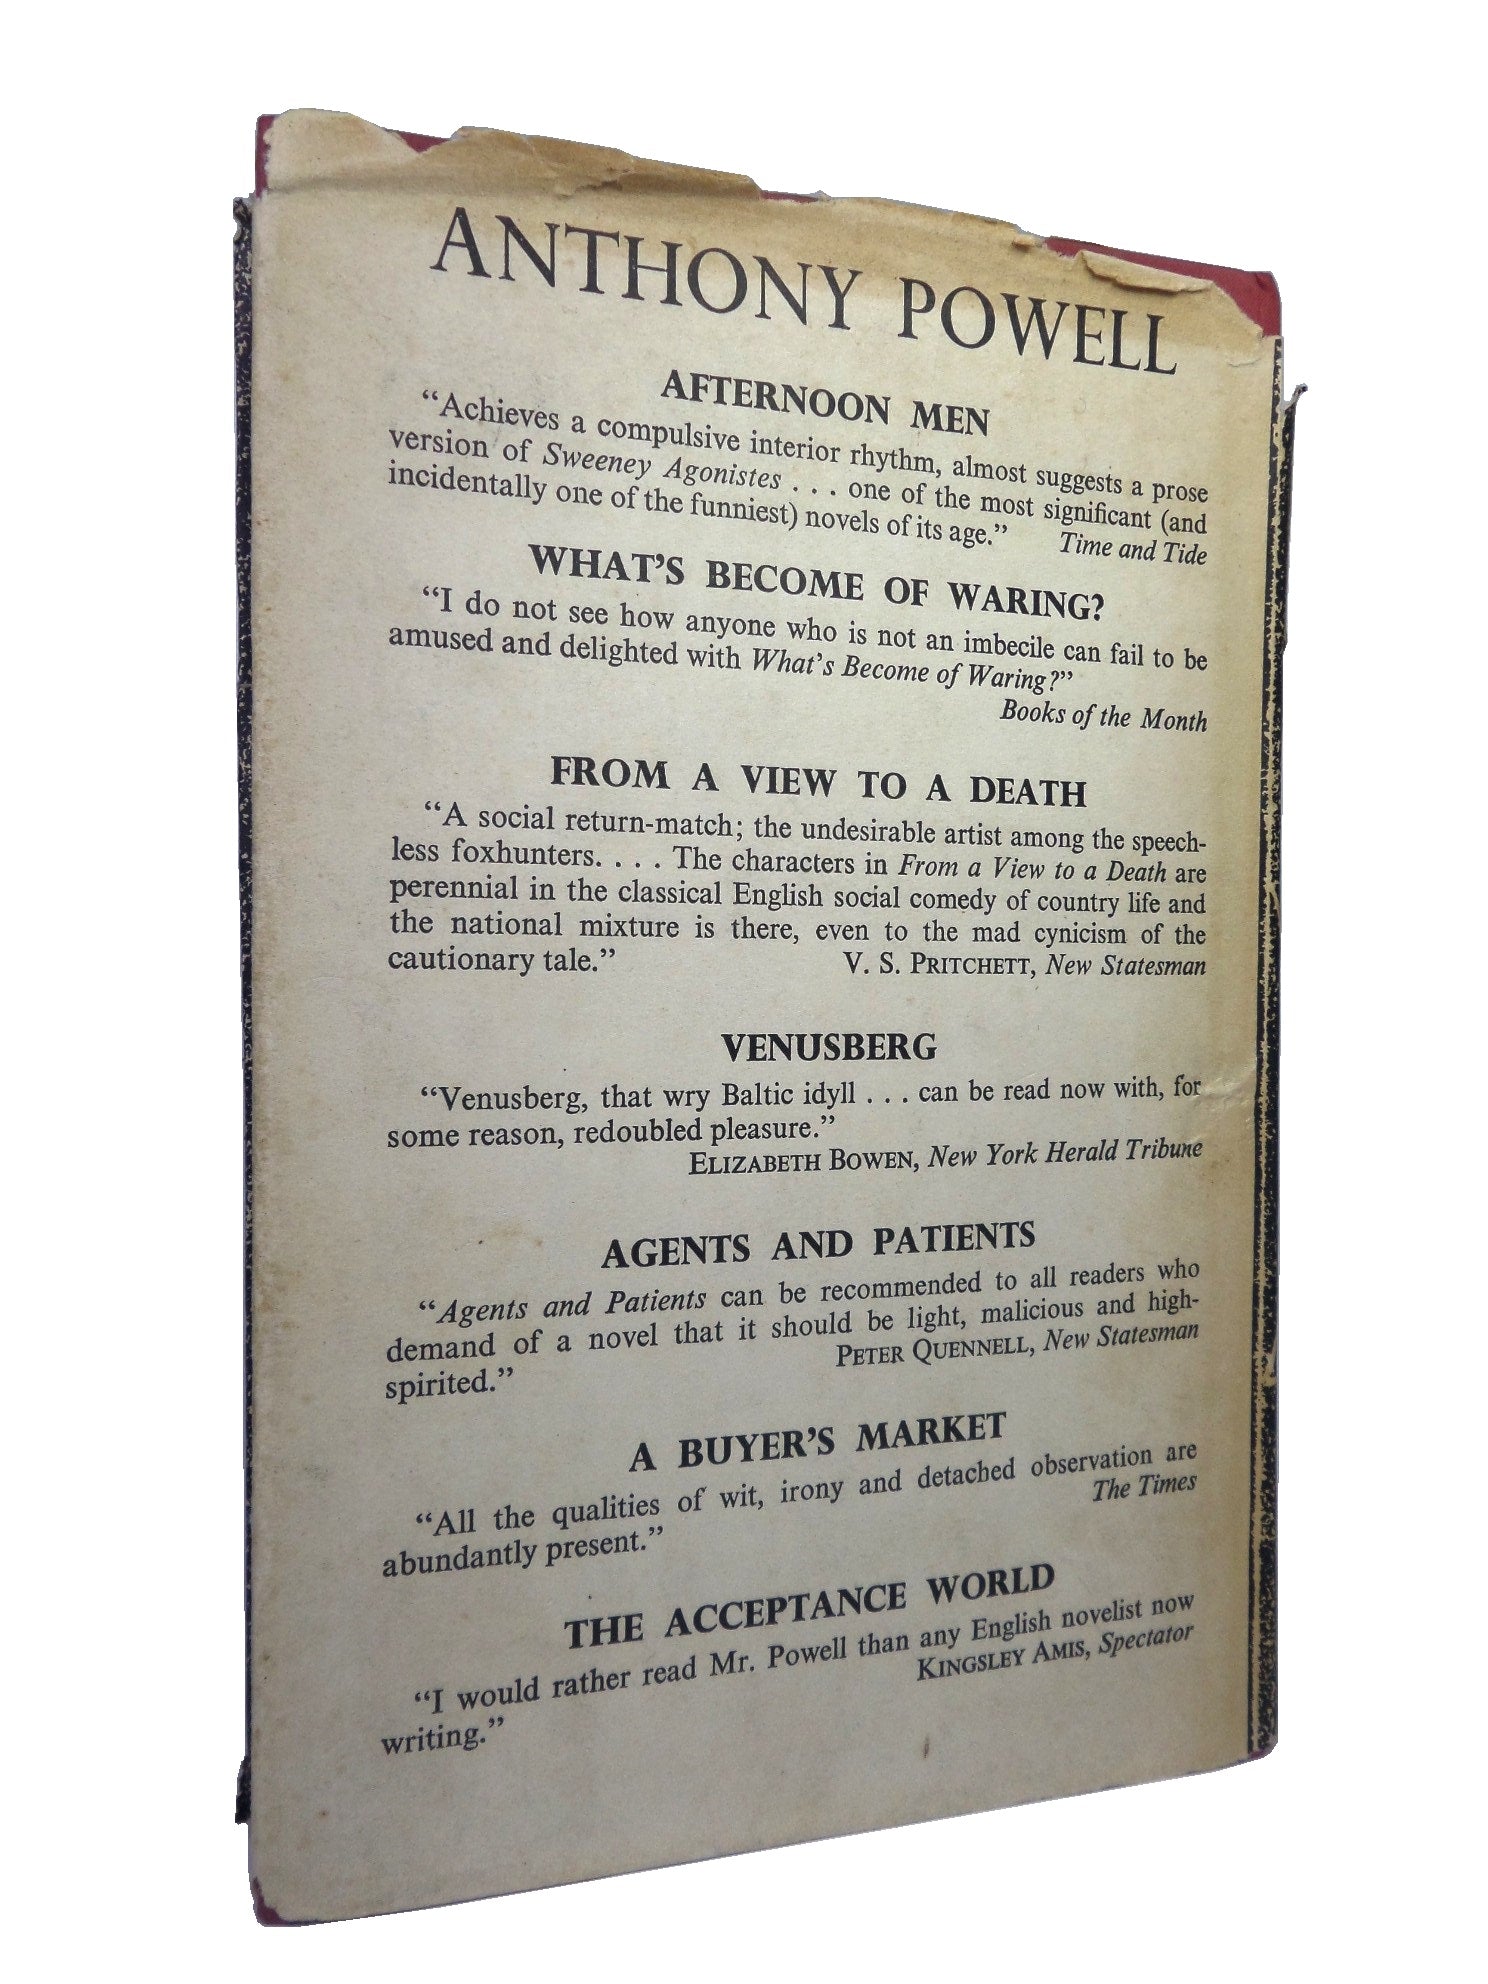 A QUESTION OF UPBRINGING BY ANTHONY POWELL 1955